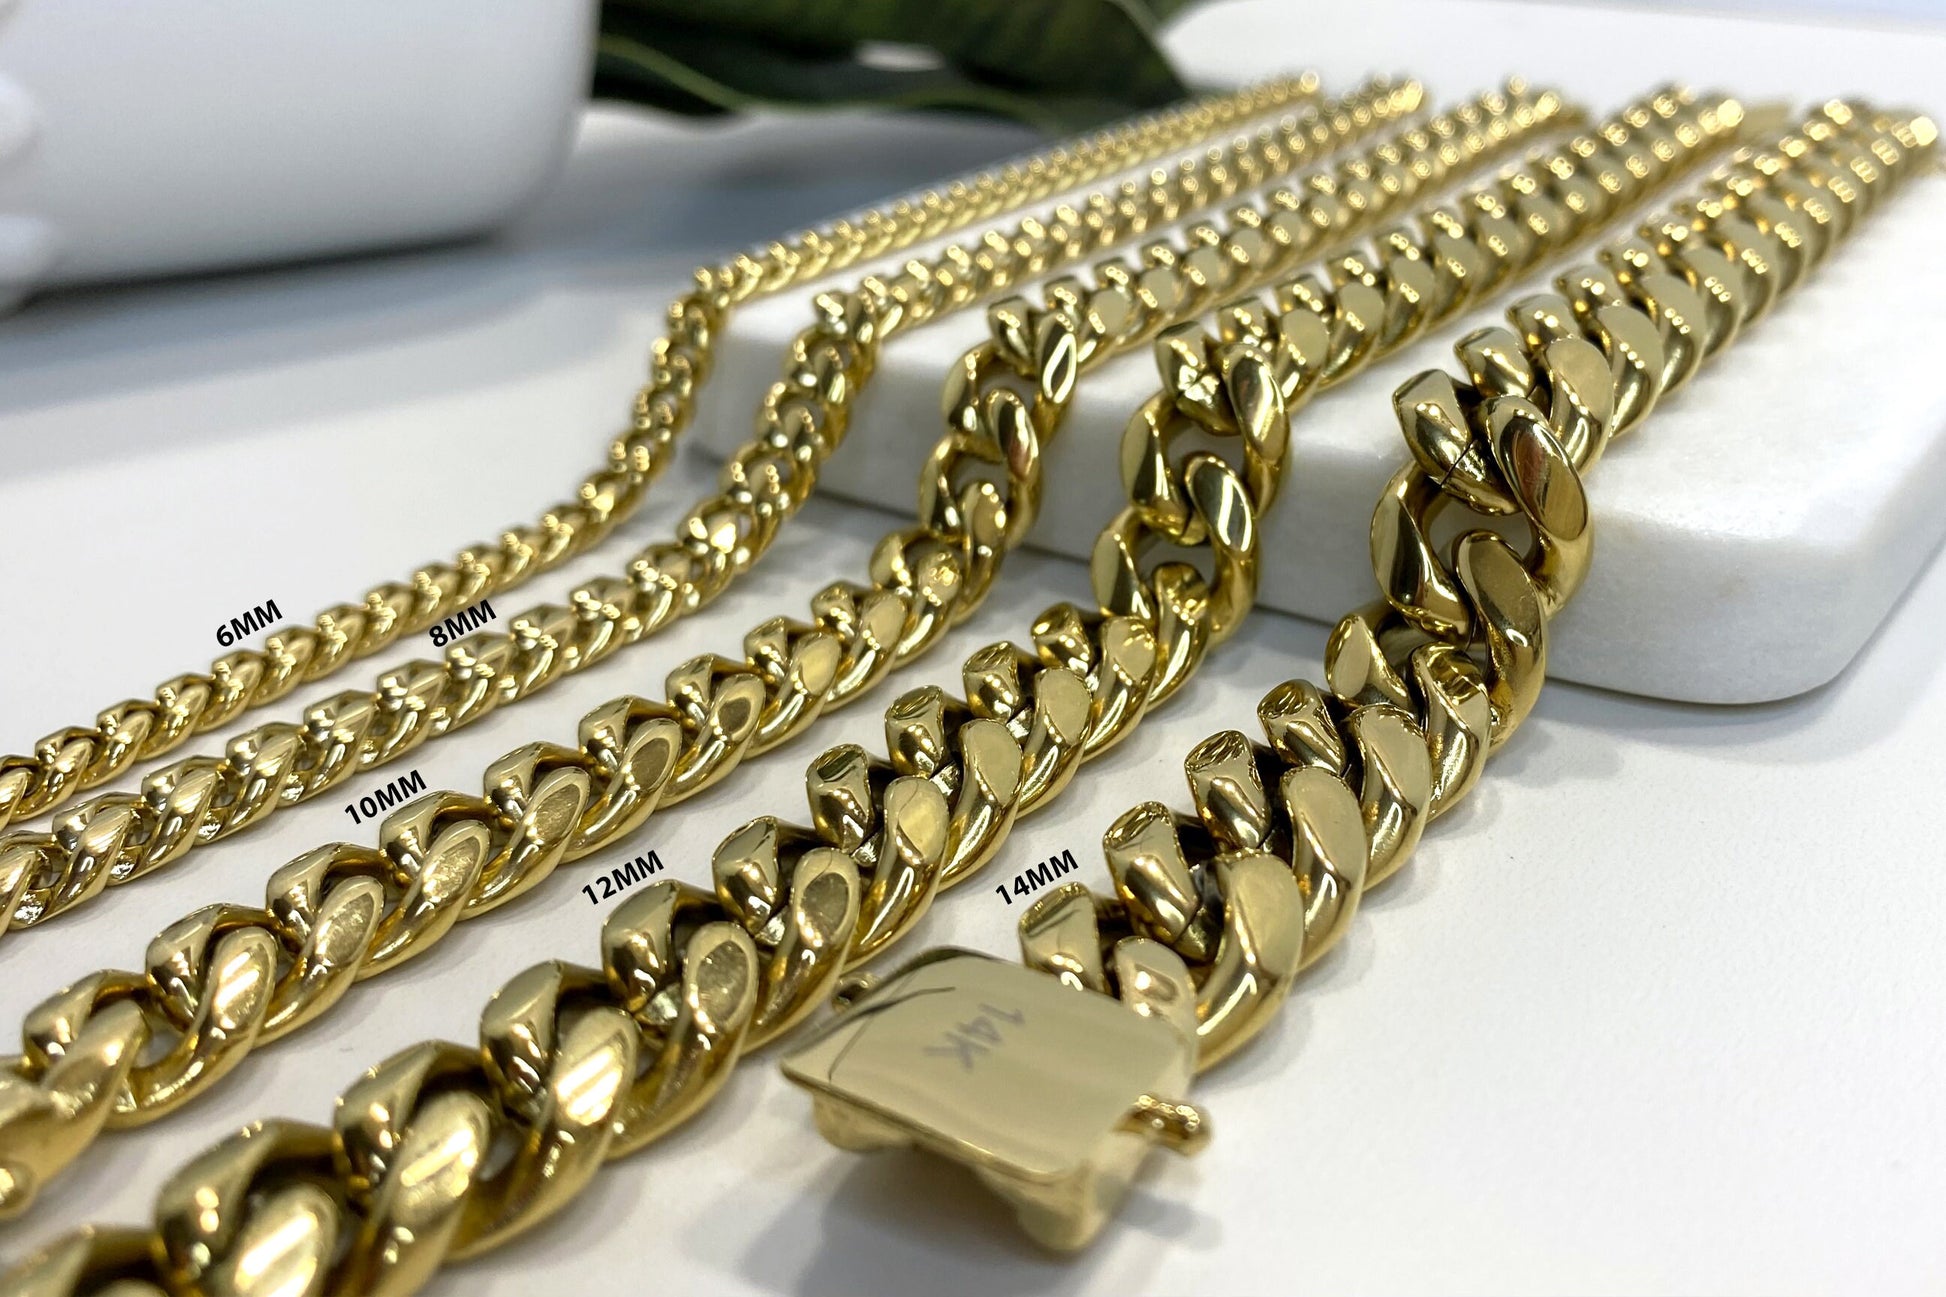 10mm Miami Cuban Link Bracelet In 14k Gold Filled Featuring Double Safety Lock Box Clasp, Unisex Curb Chain, Wholesale Jewelry Supplies